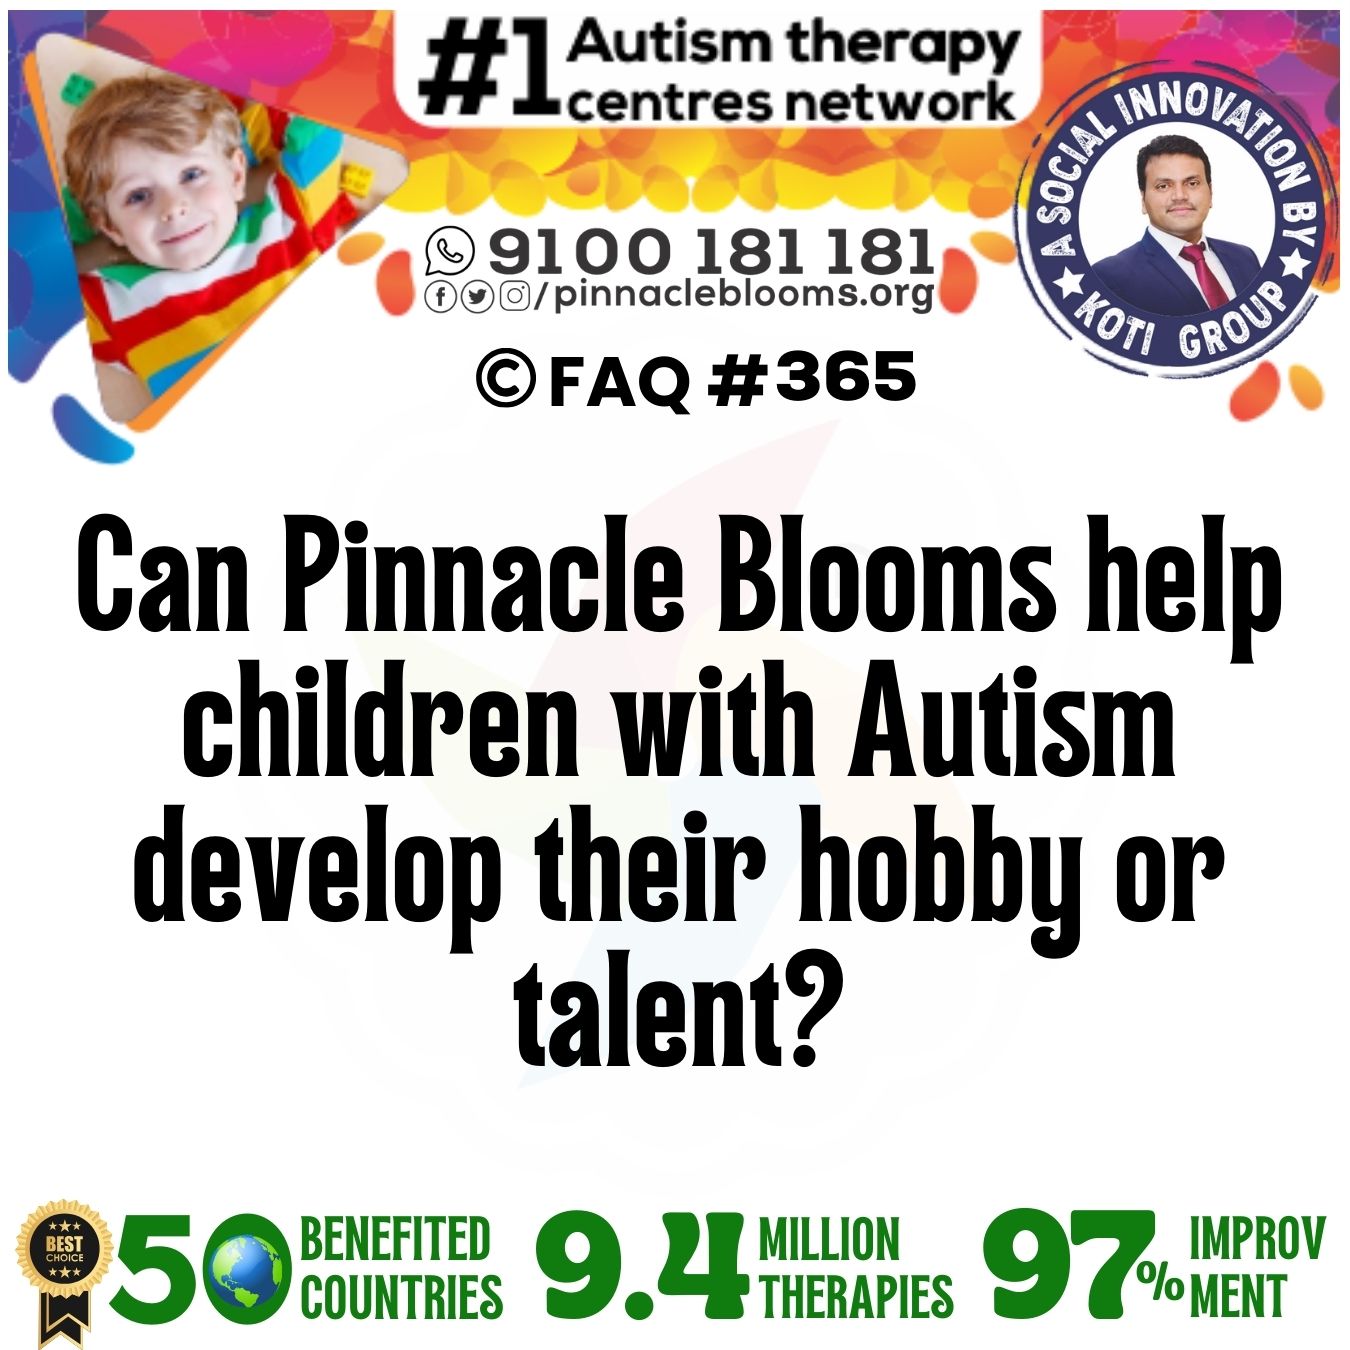 Can Pinnacle Blooms help children with Autism develop their hobby or talent?